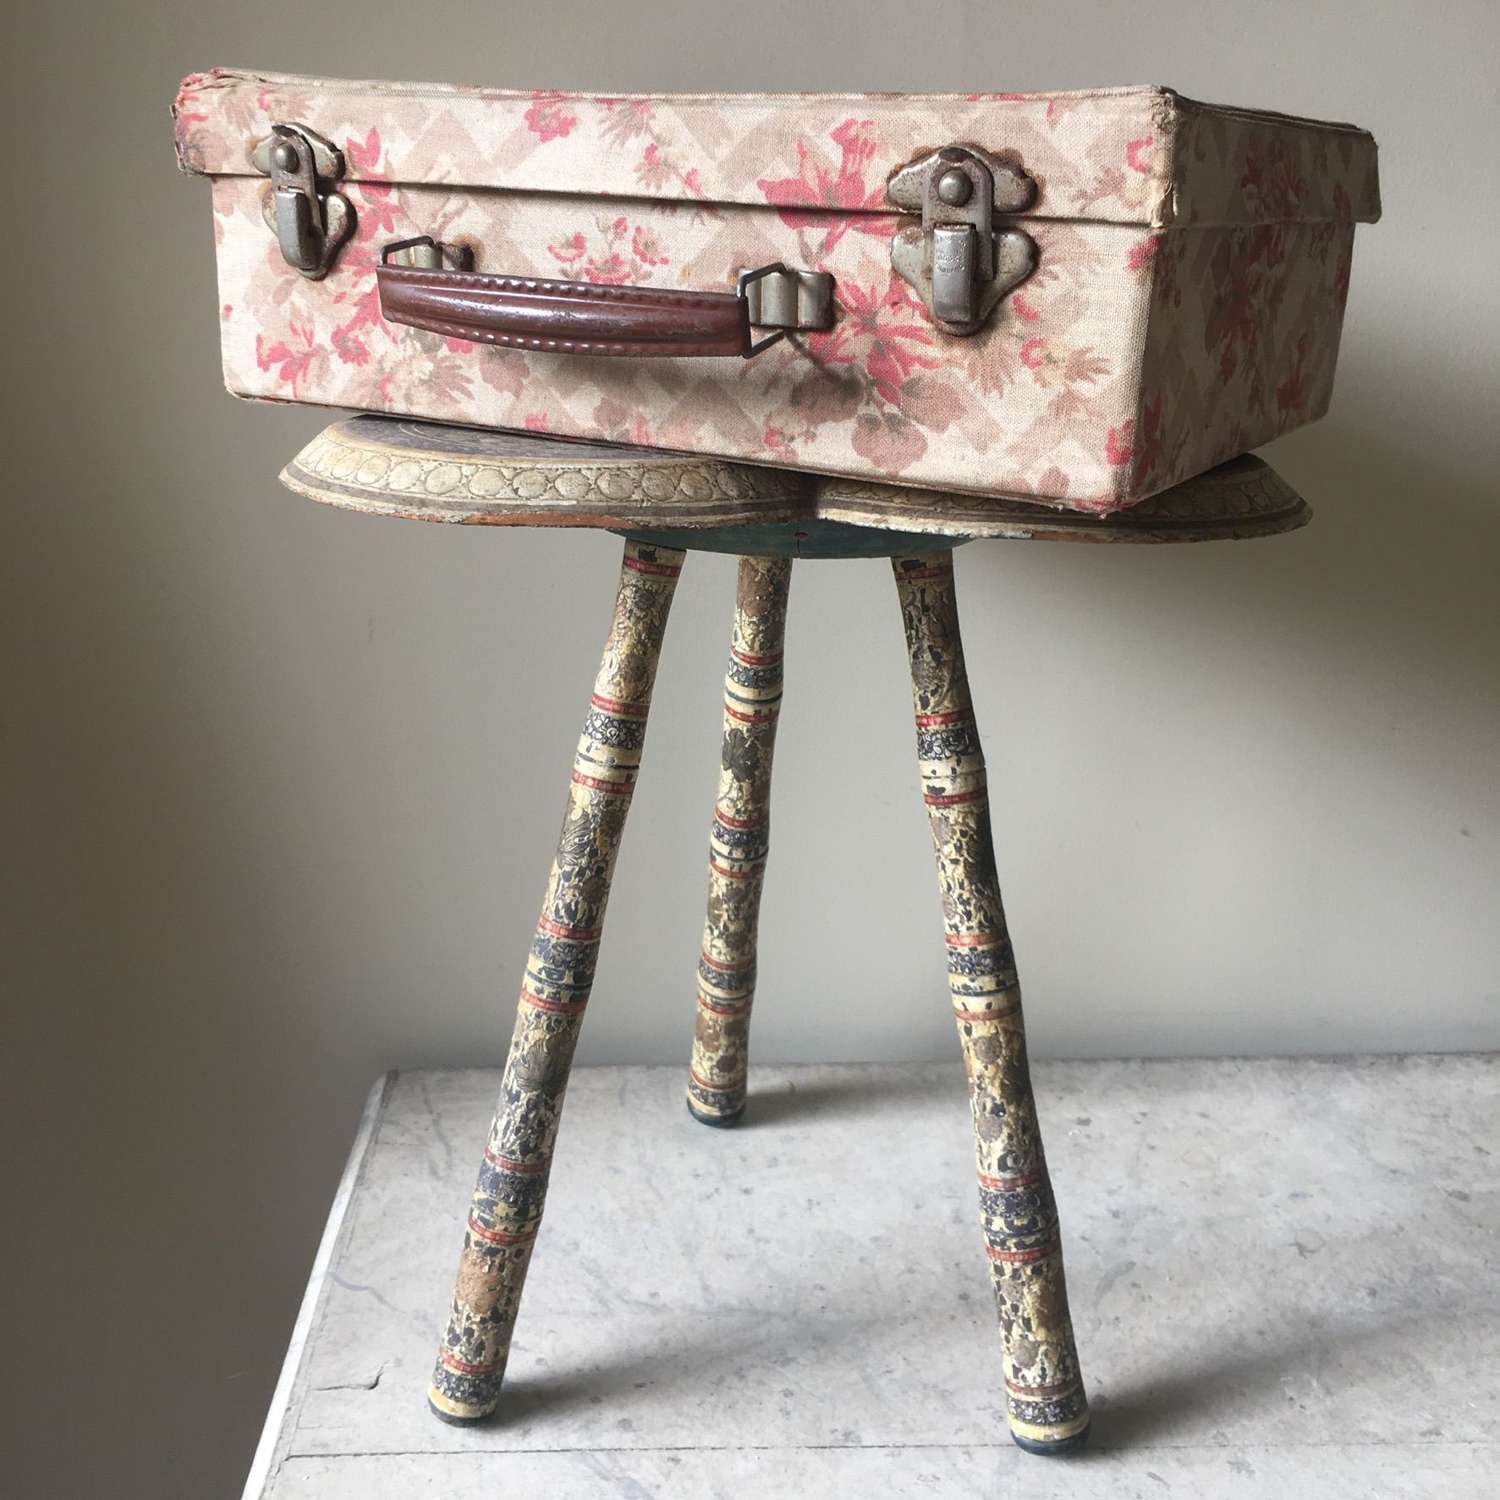 Vintage fabric covered suitcase